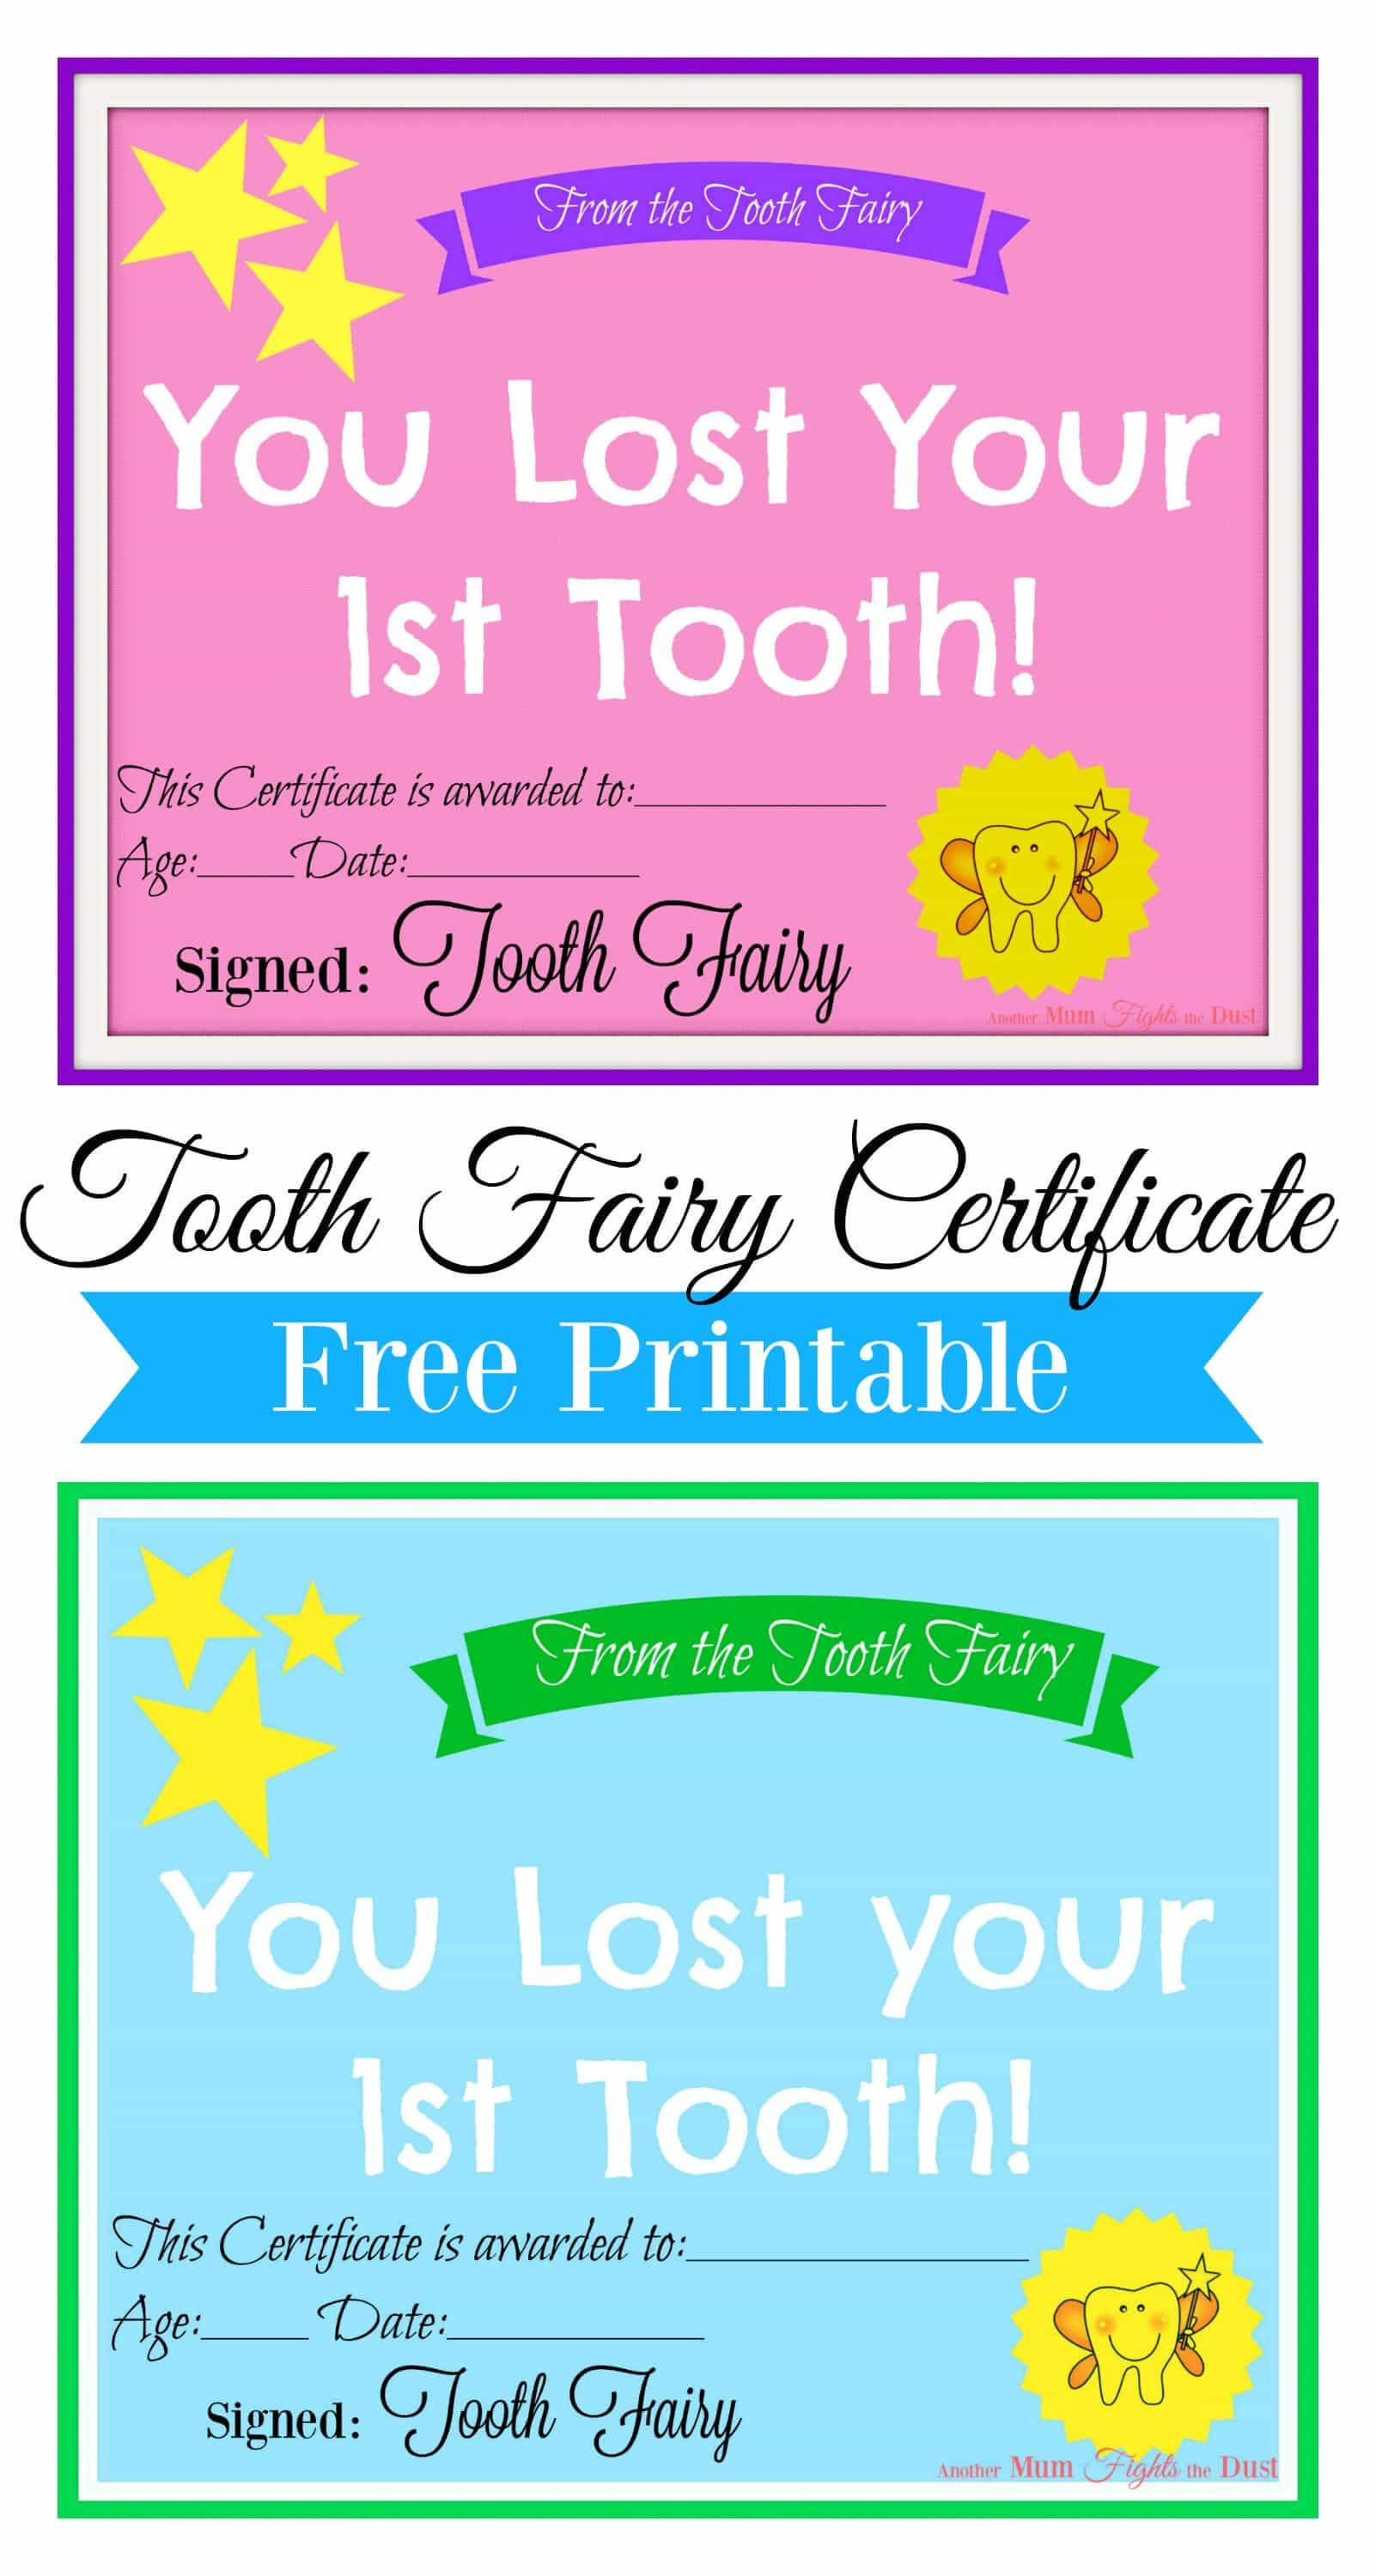 Free Printable Tooth Fairy Certificate | Tooth Fairy Ideas With Regard To Free Tooth Fairy Certificate Template